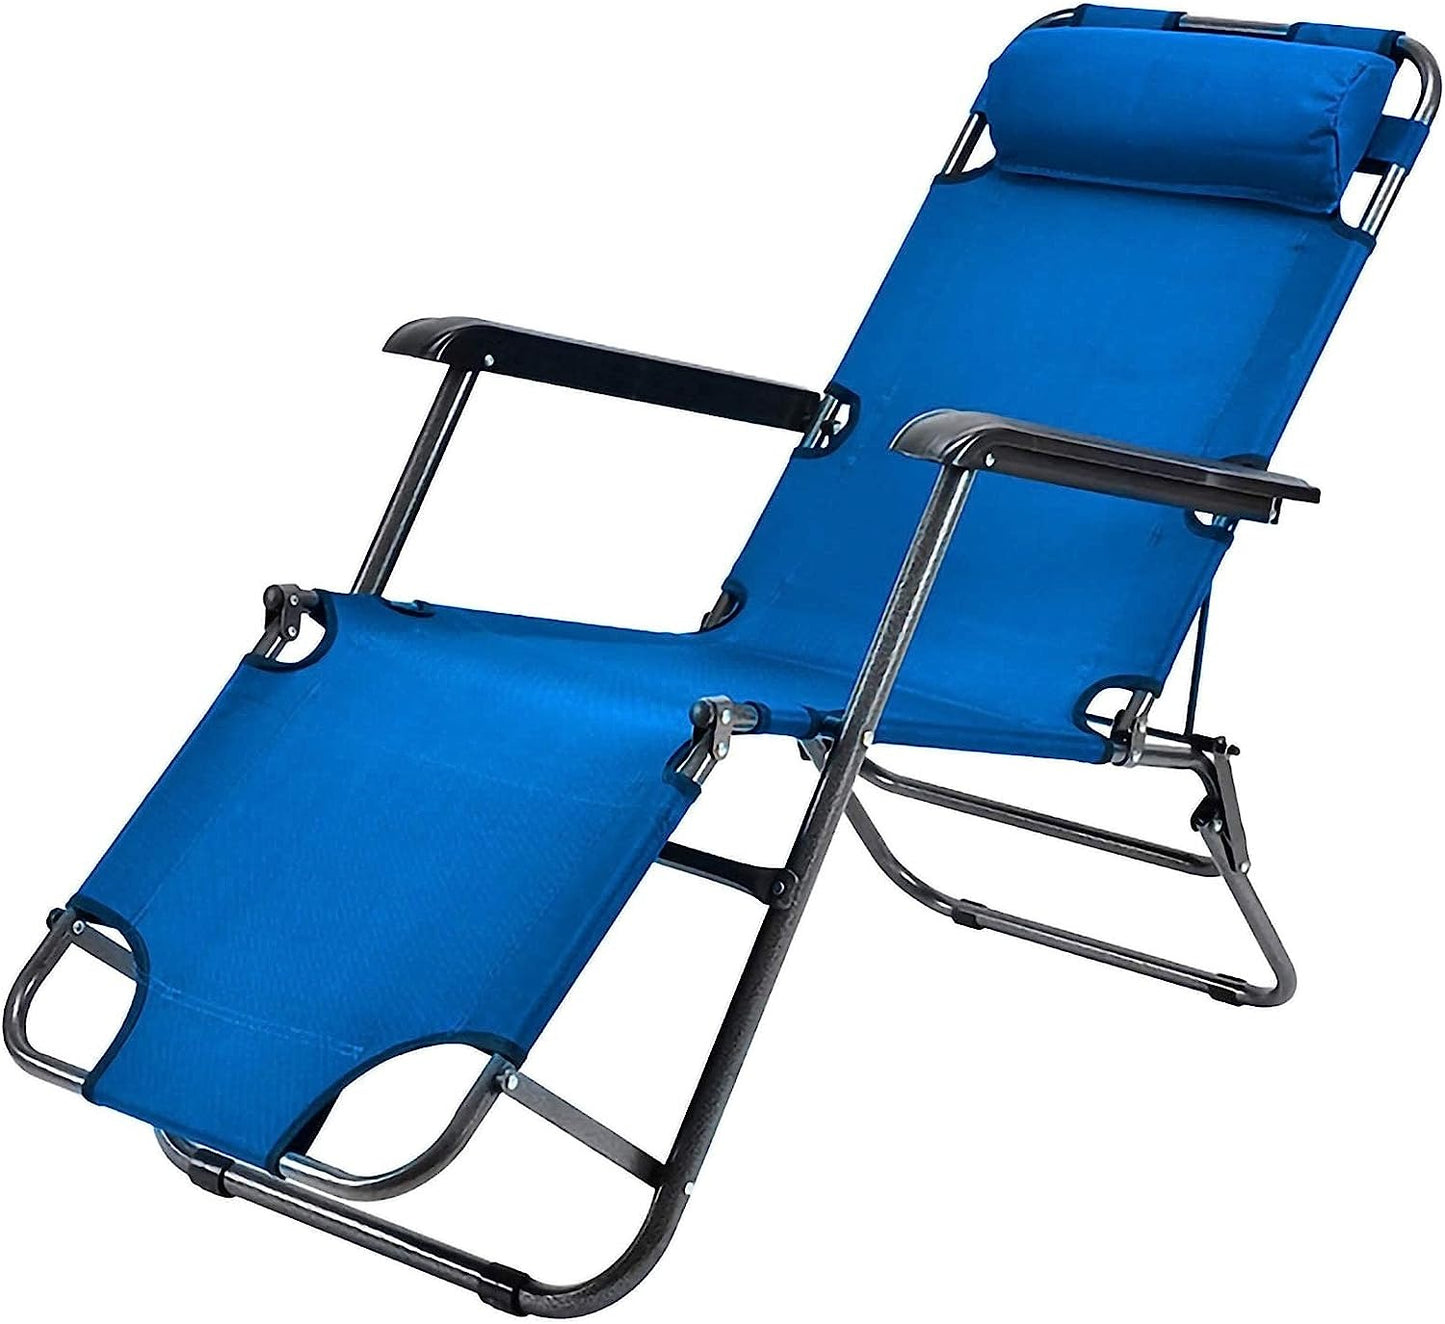 Zero Gravity Portable Outdoor Camping Patial Chair